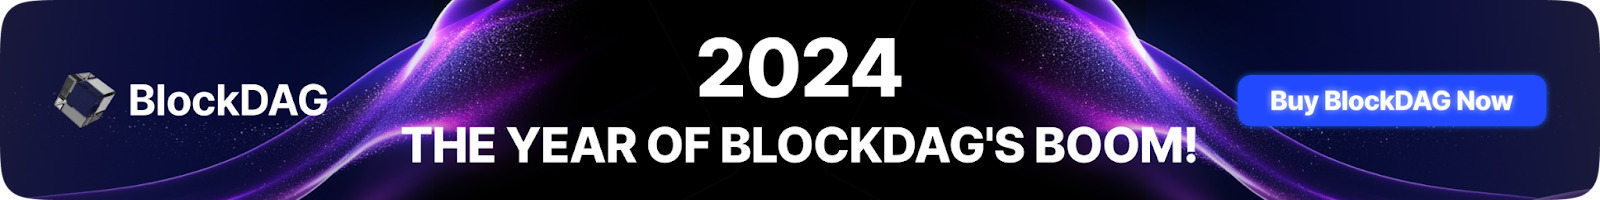 Why BlockDAG’s $54.5M Presale & Cutting-Edge Dashboard Outshine ICP and RNDR for 2024’s Top Crypto Pick